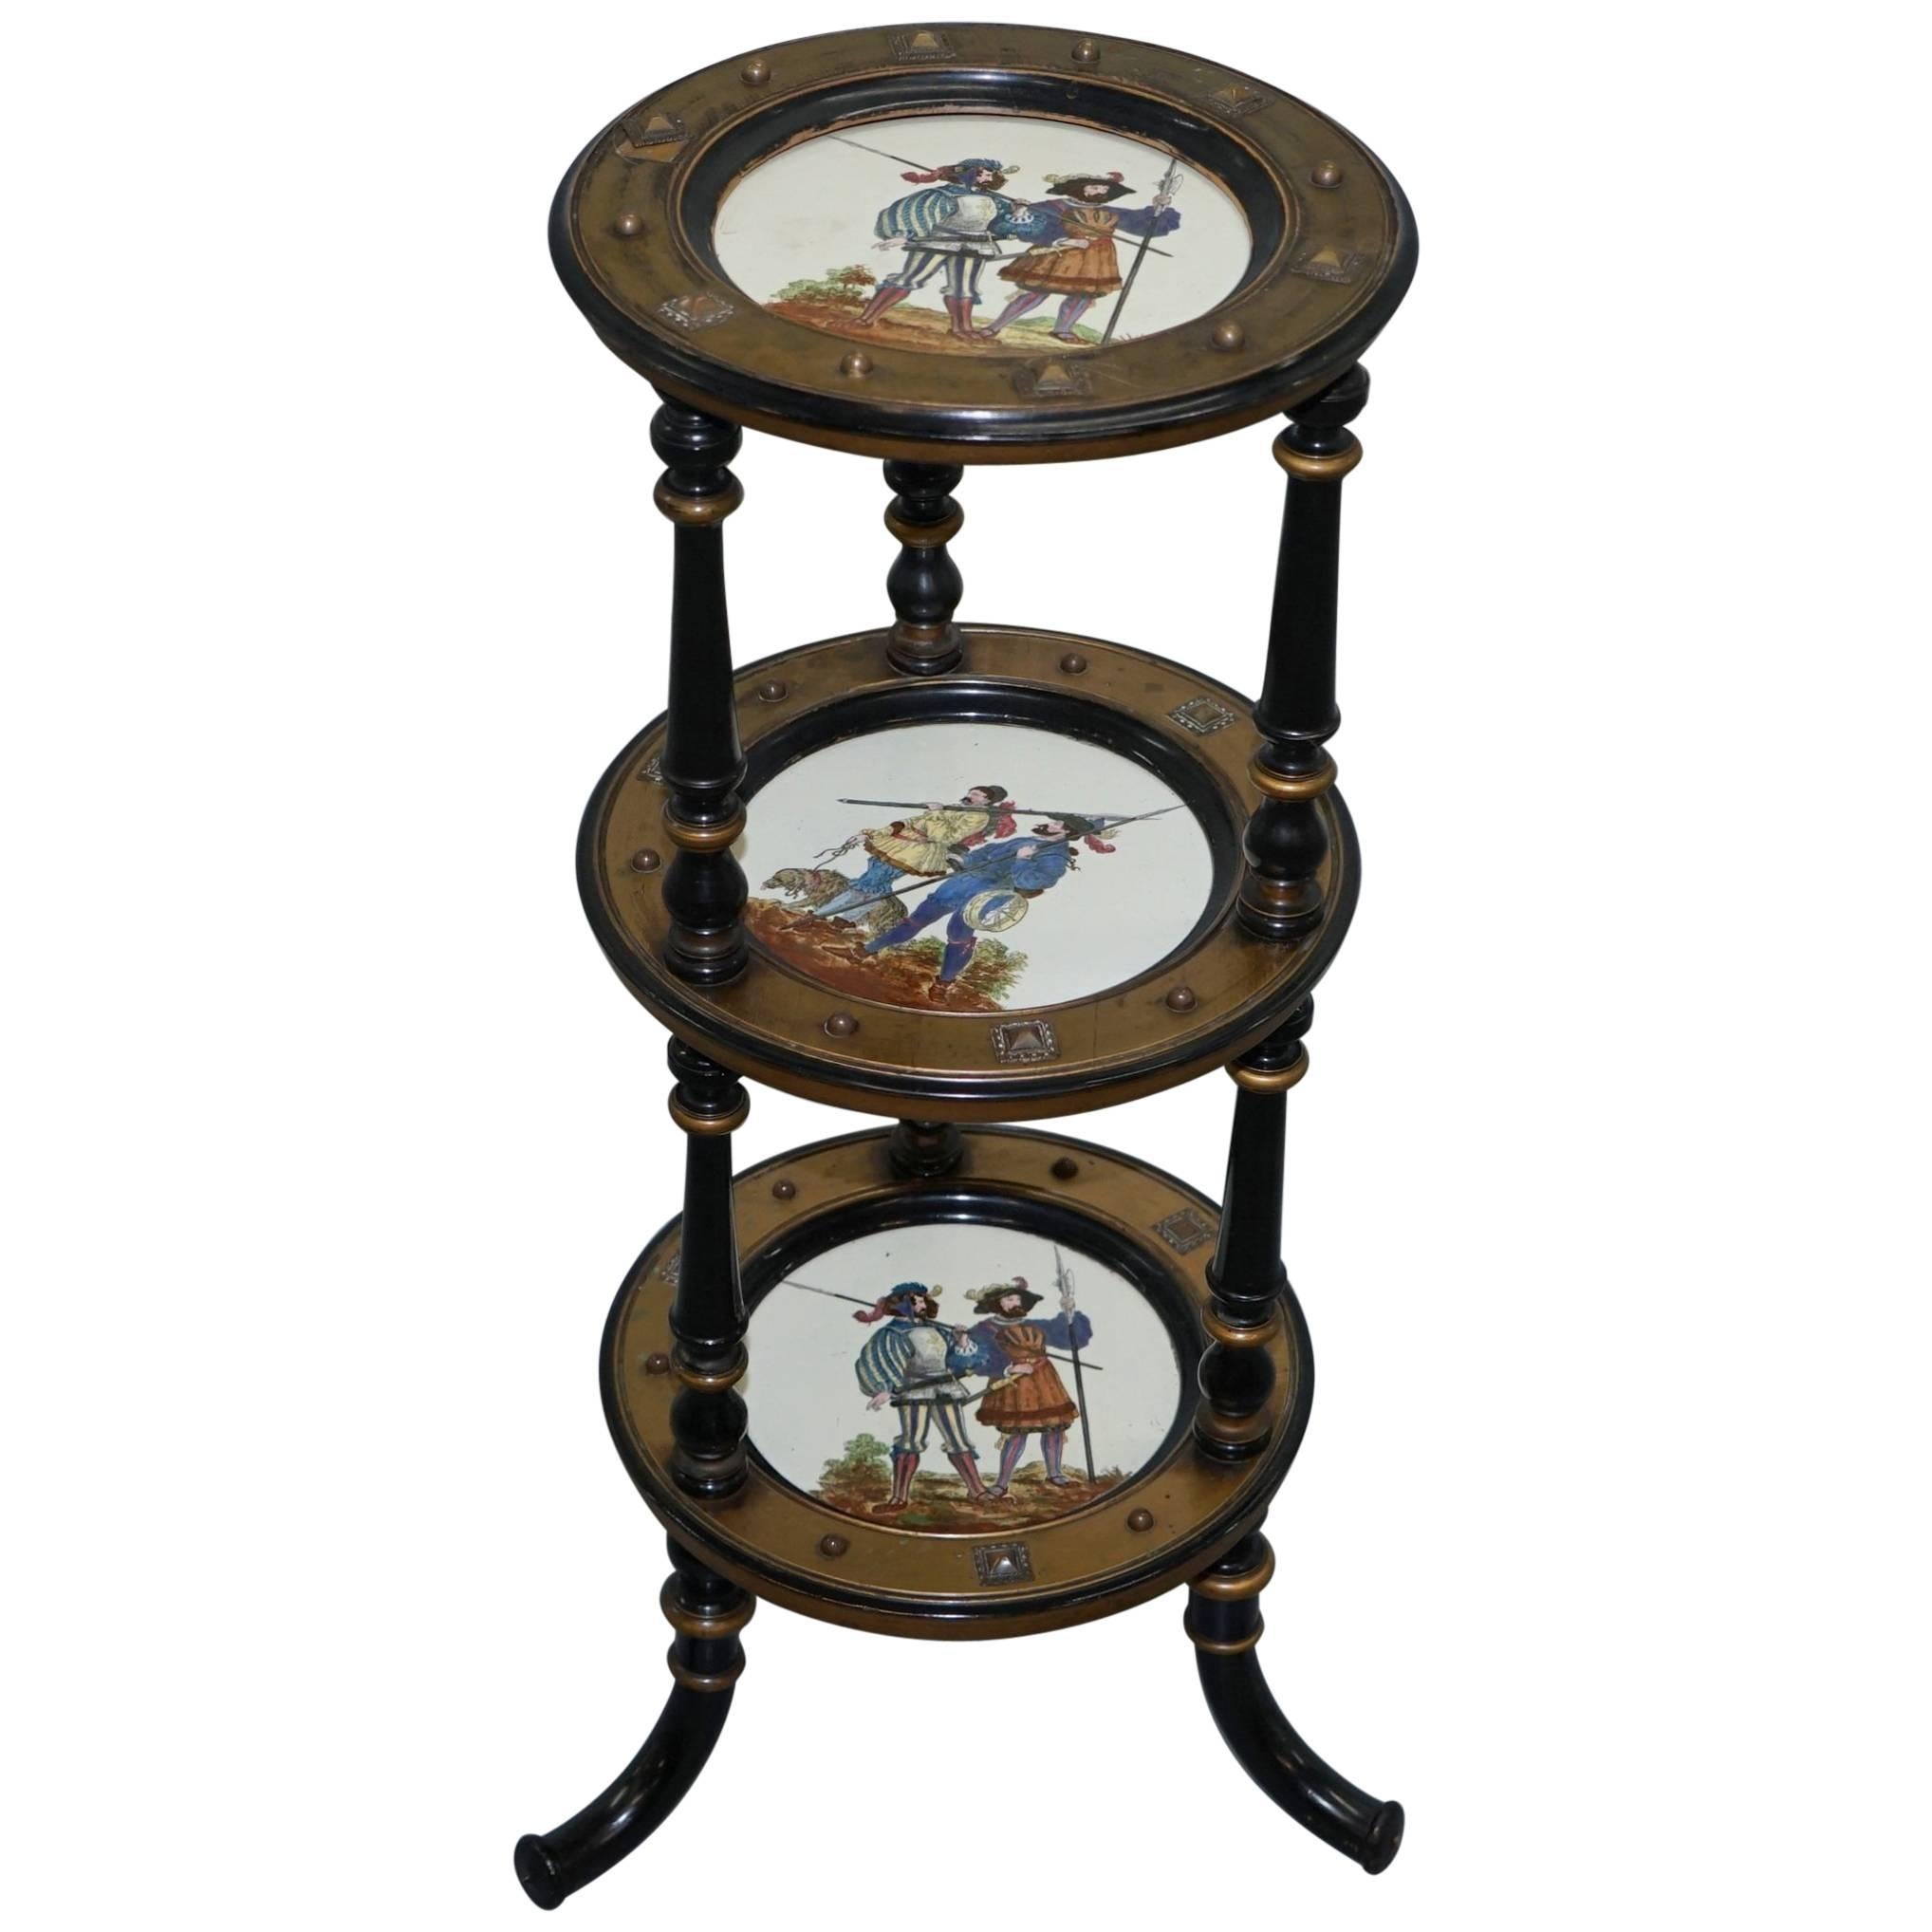 Aesthetic Movement Three-Tired Display Stand Hand-Painted Plates